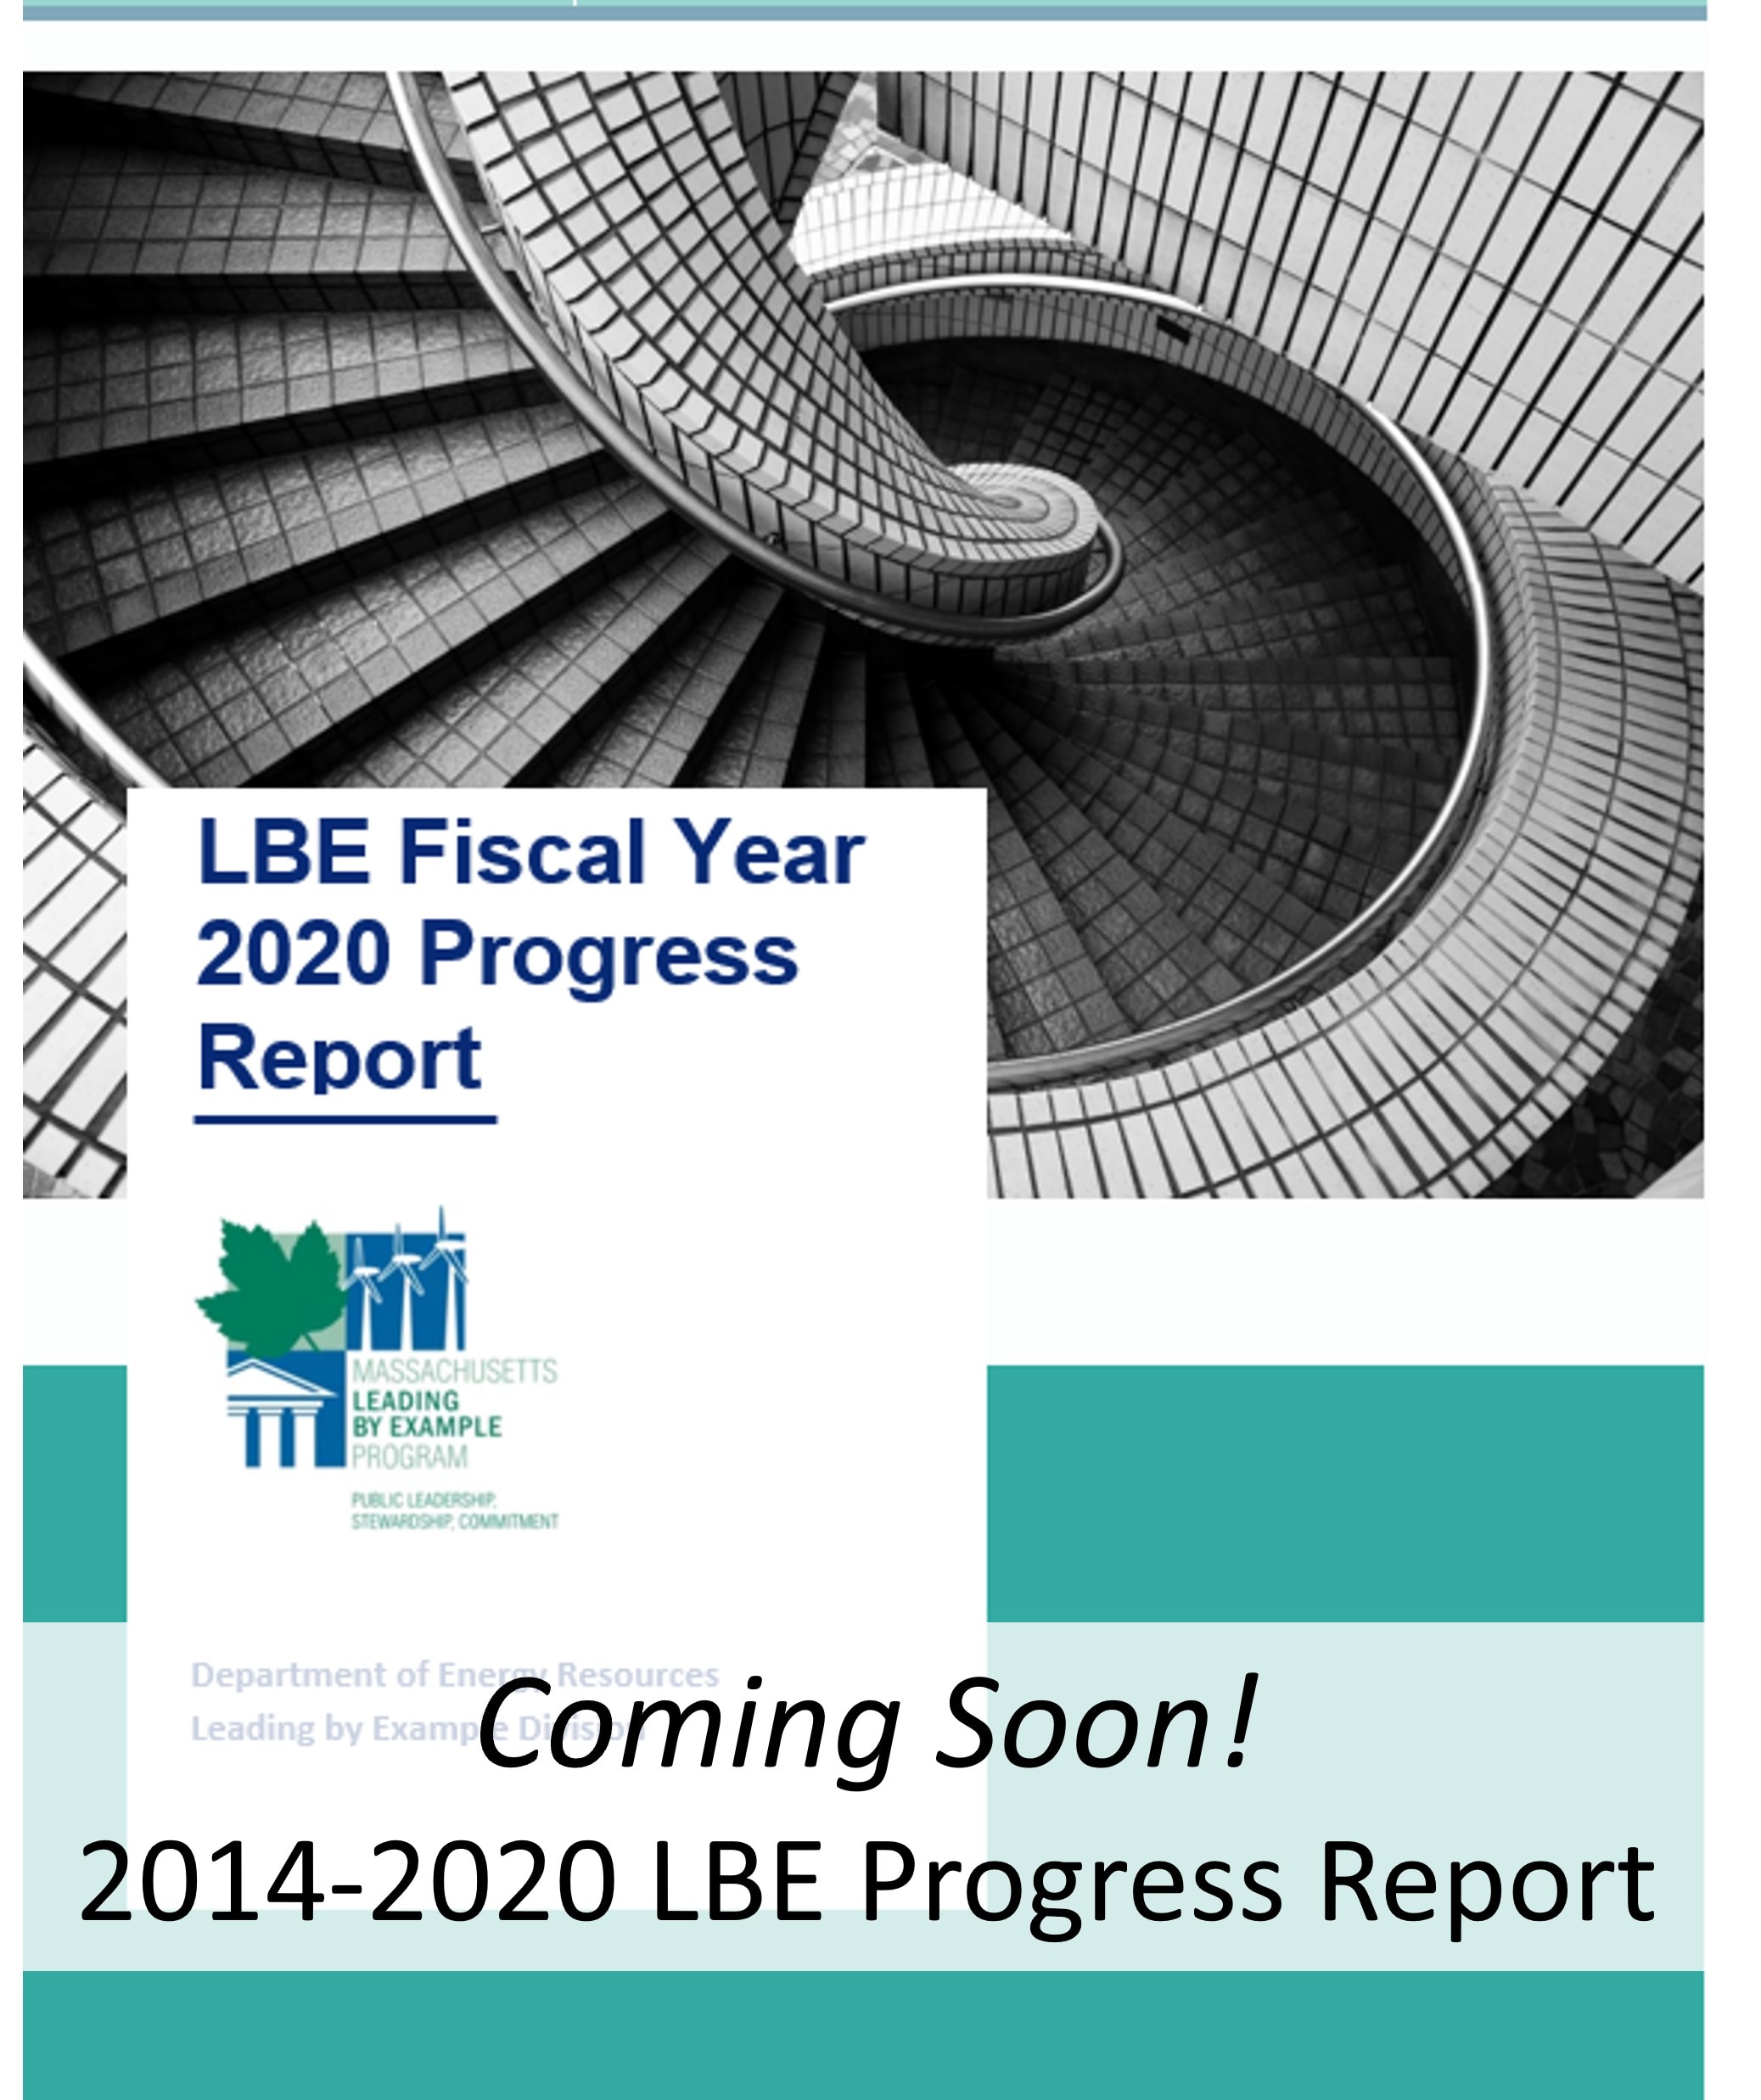 This report, coming soon, will detail progress from 2014-2020.